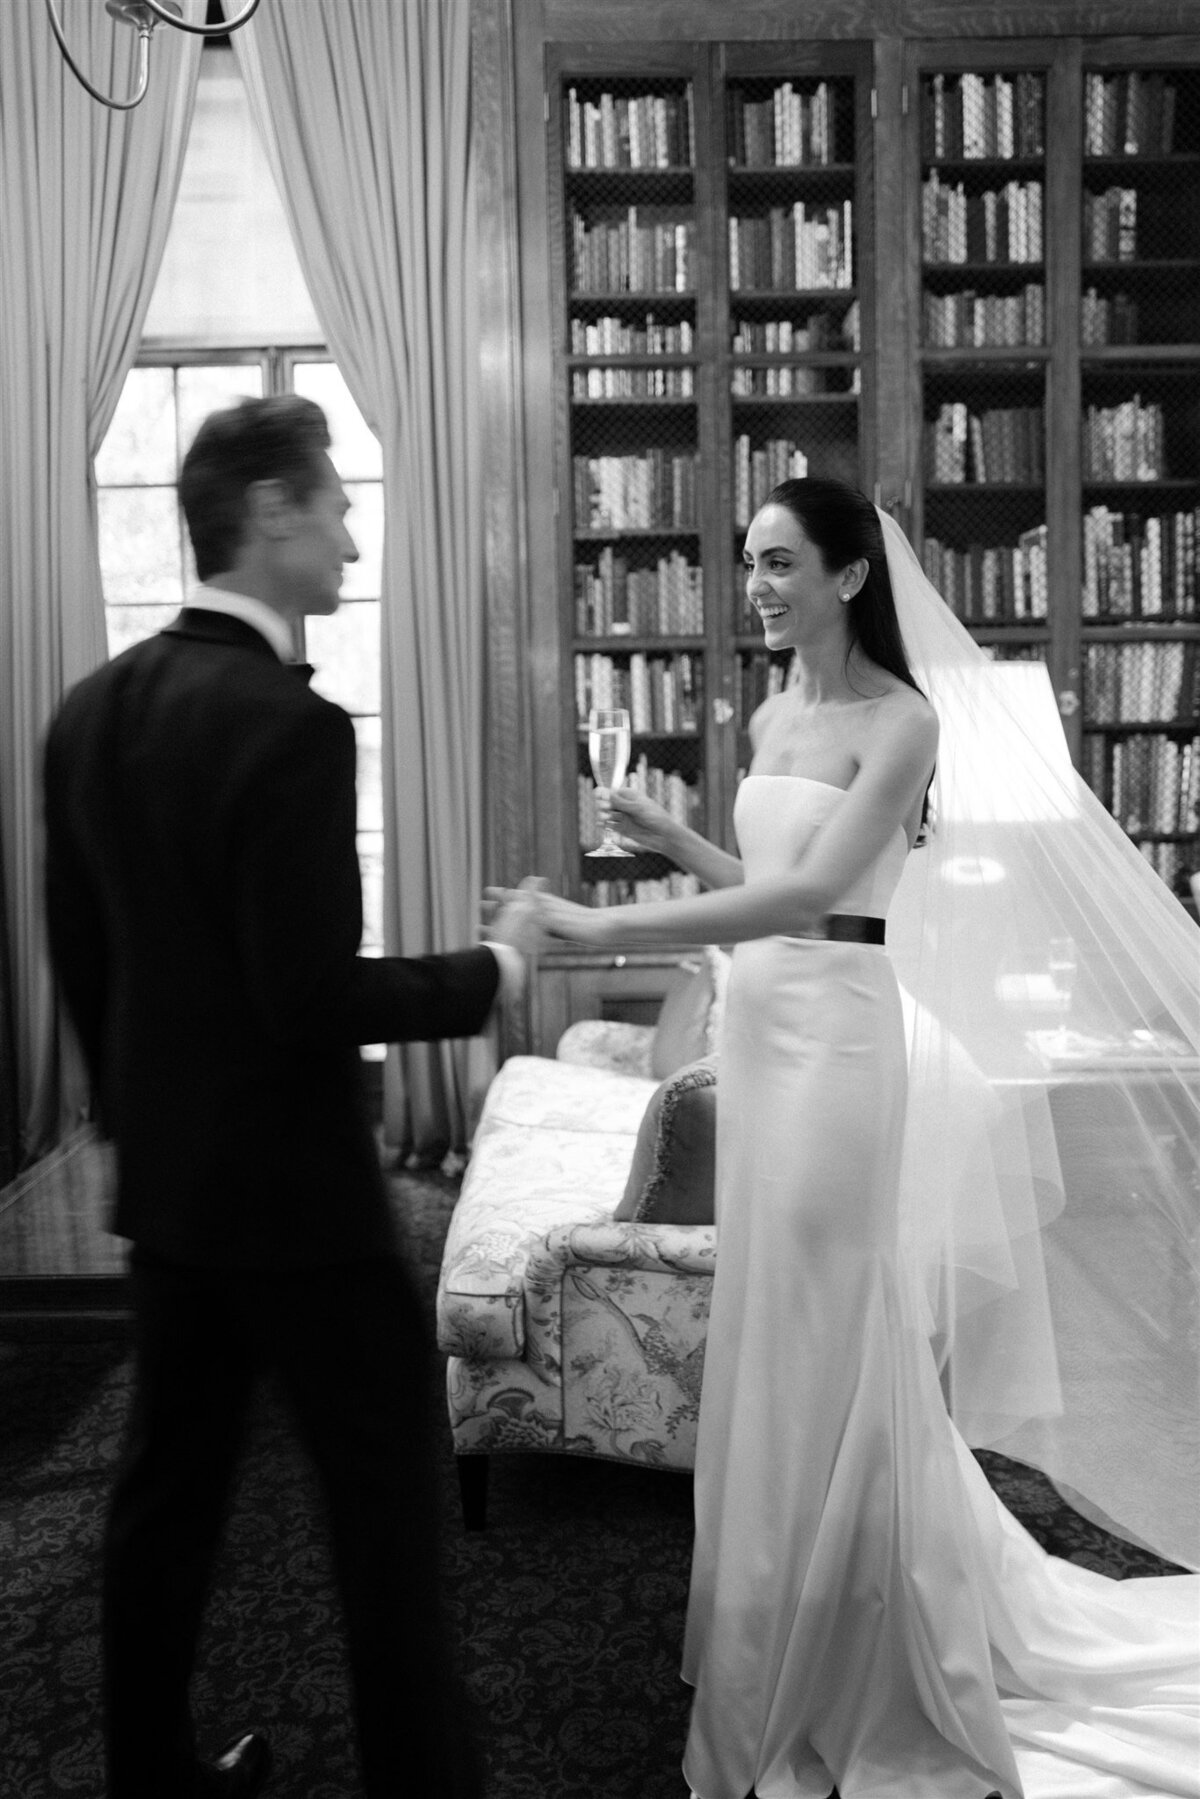 Bride and groom after wedding ceremony in library in black and white photography